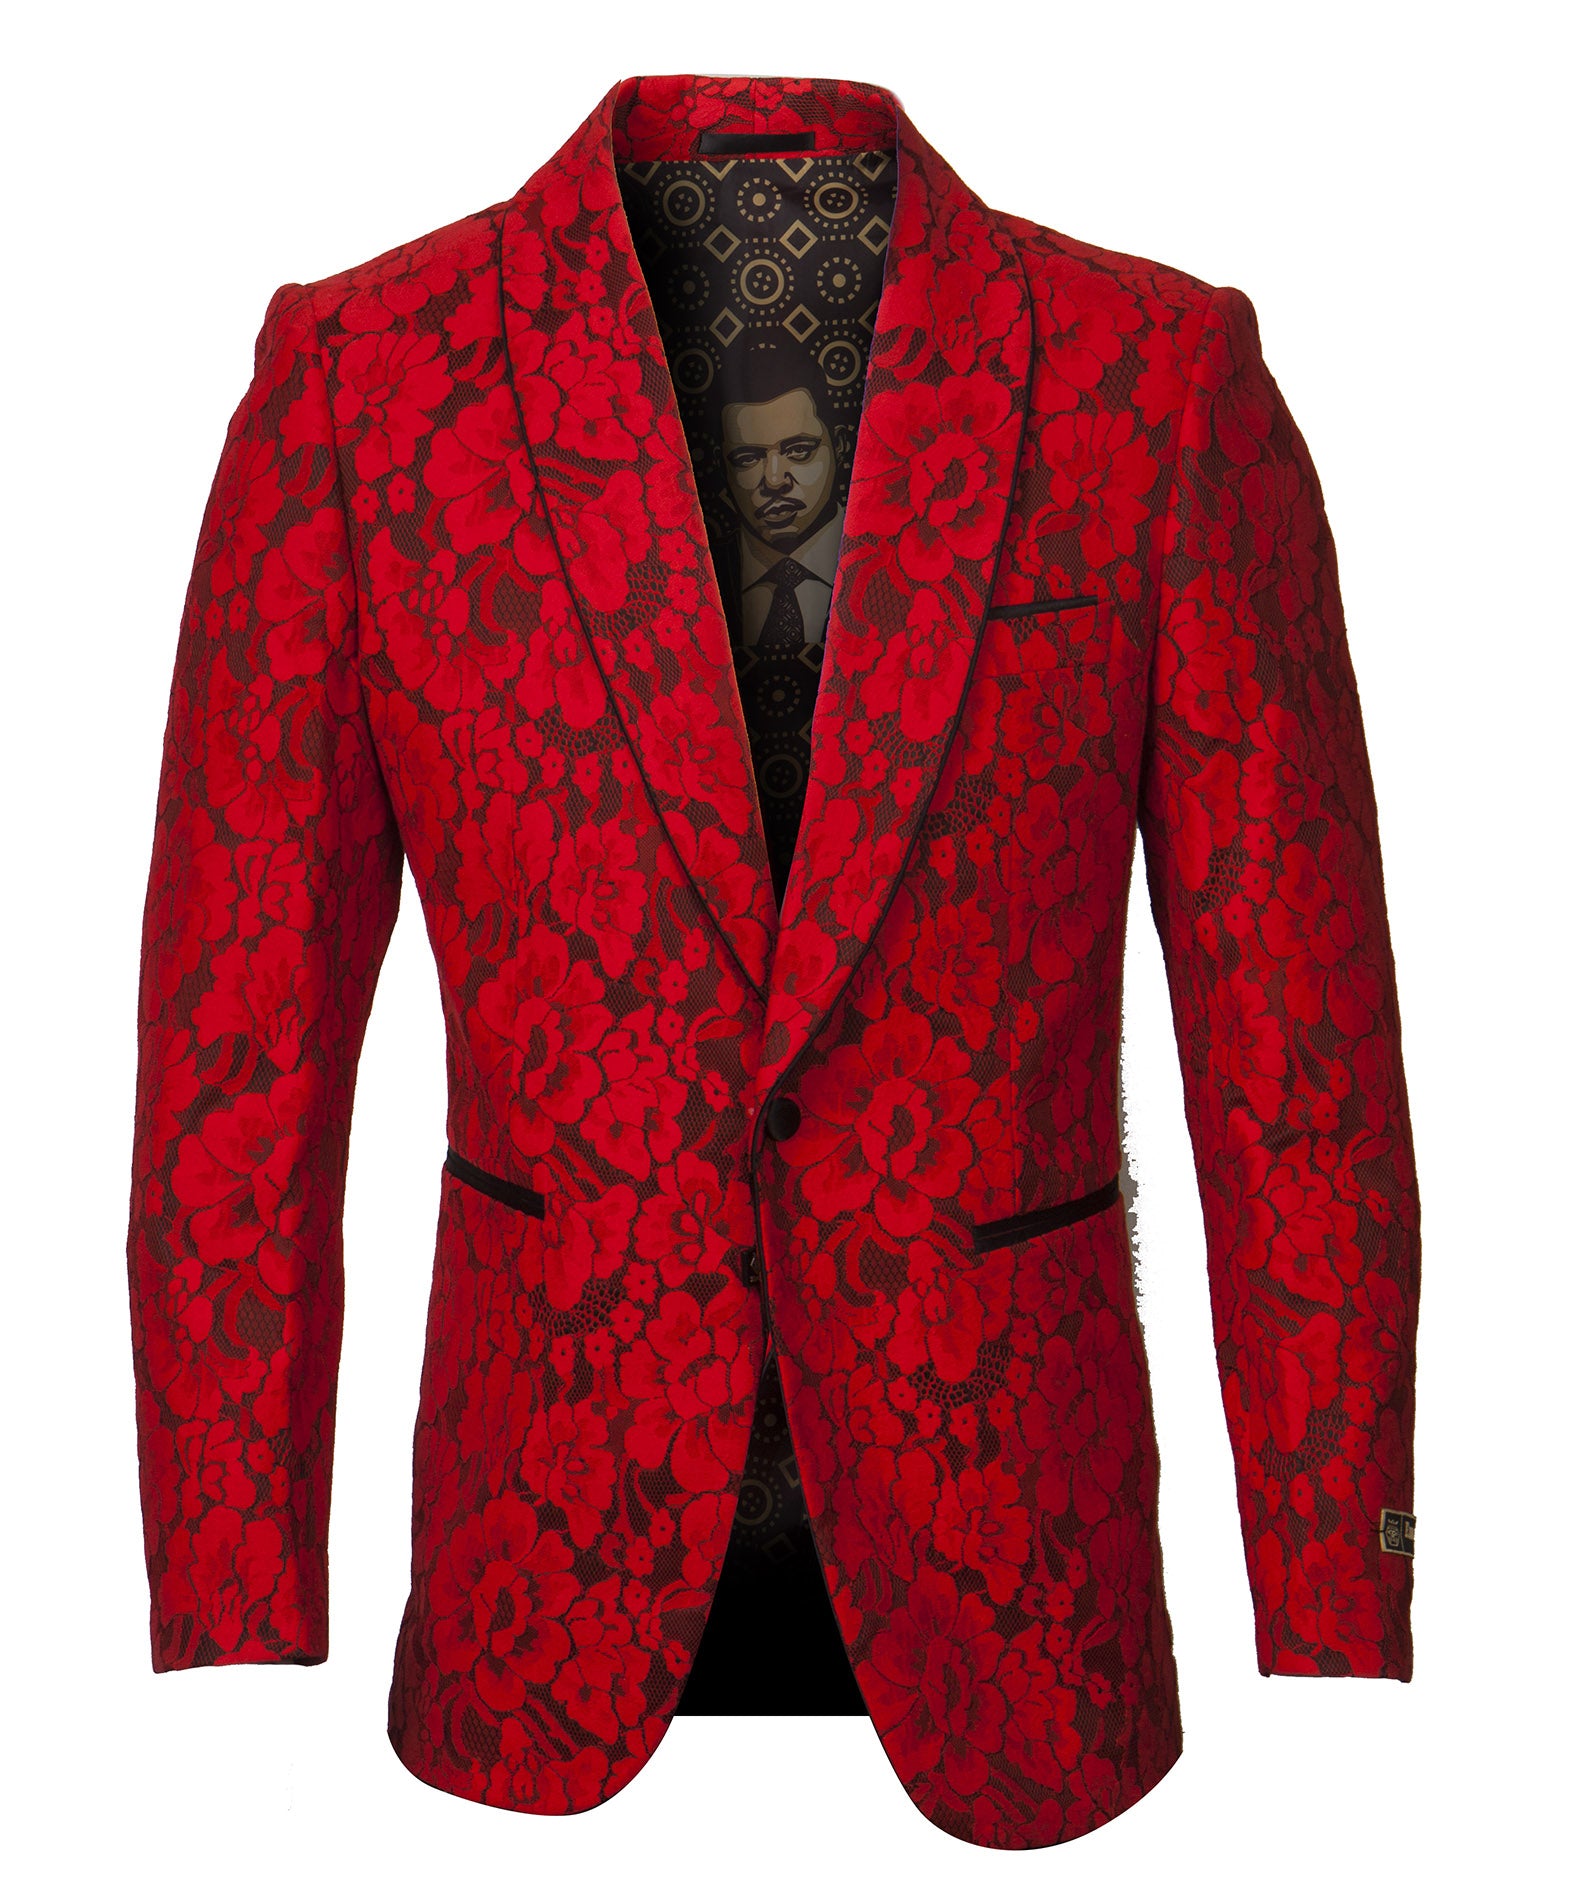 Red Empire Show Blazers Formal Dinner Suit Jackets For Men ME277H-02